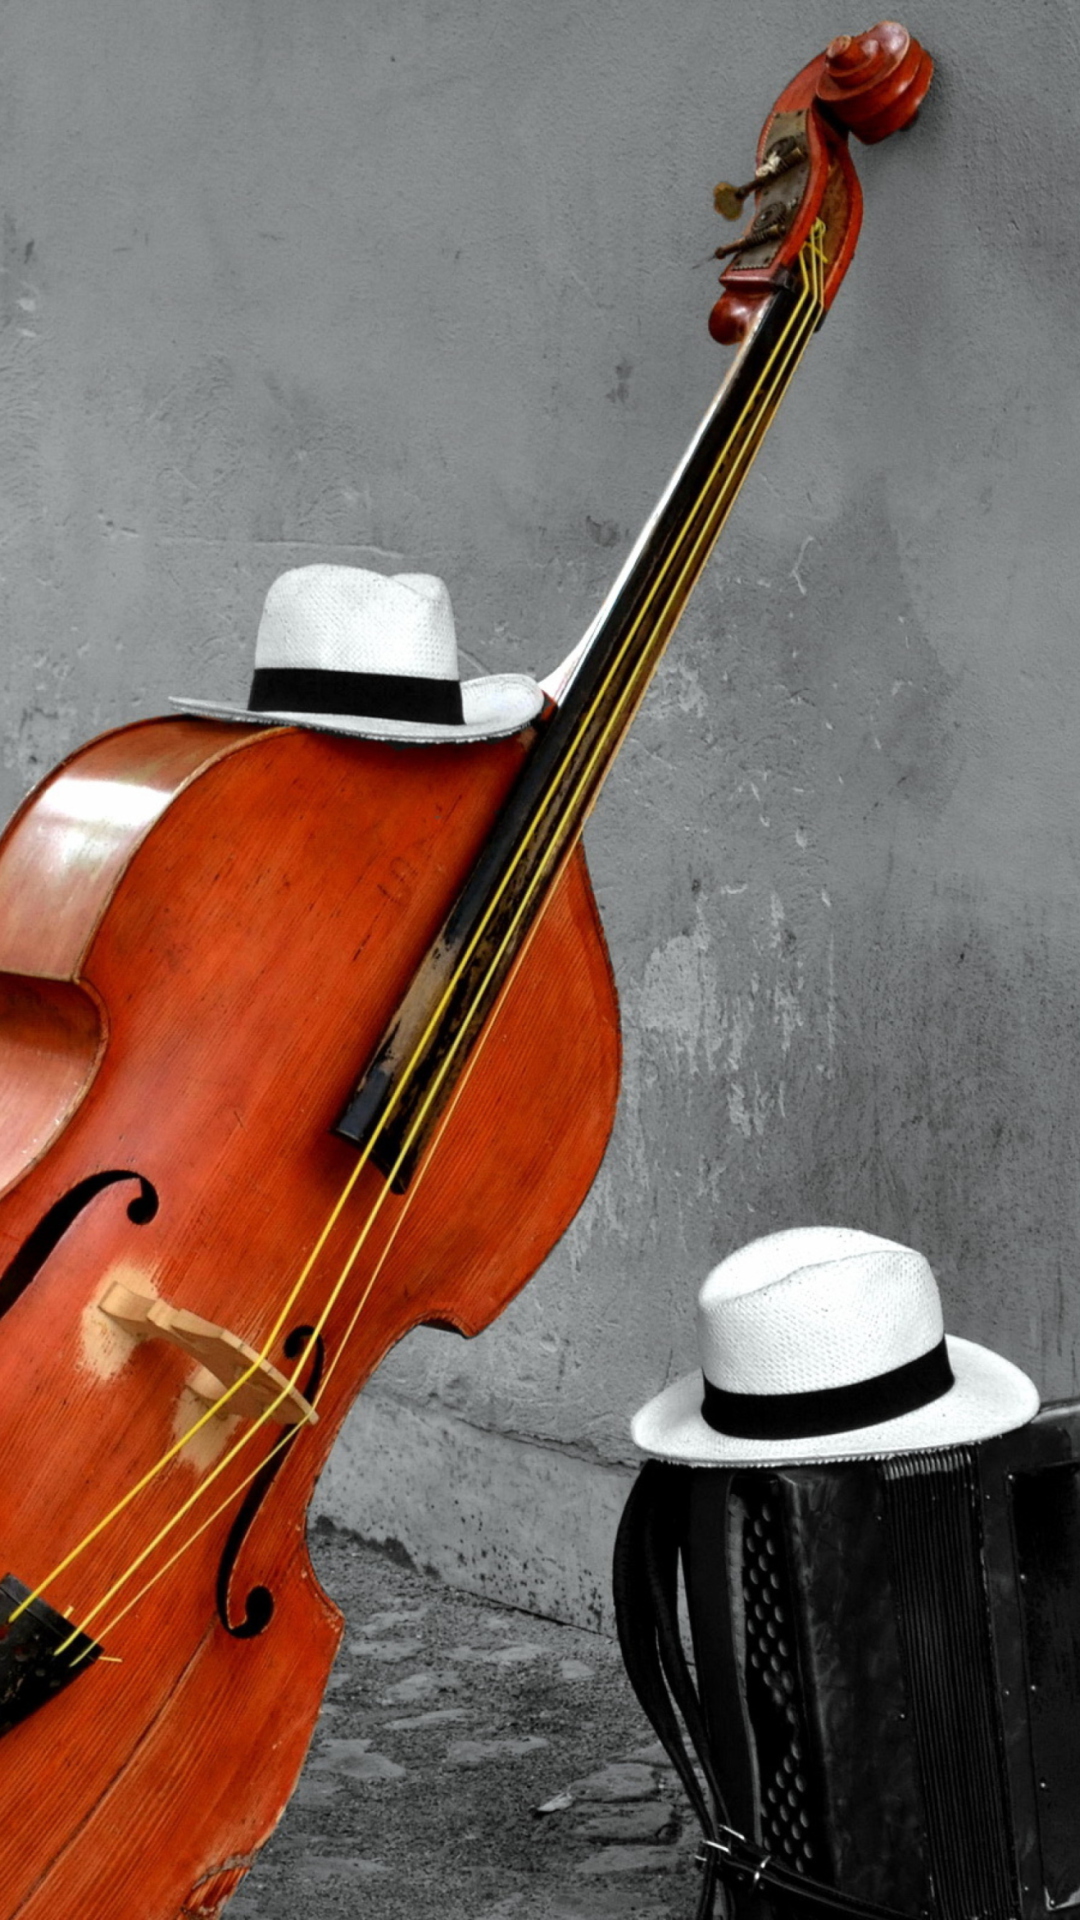 Contrabass And Hat On Street wallpaper 1080x1920